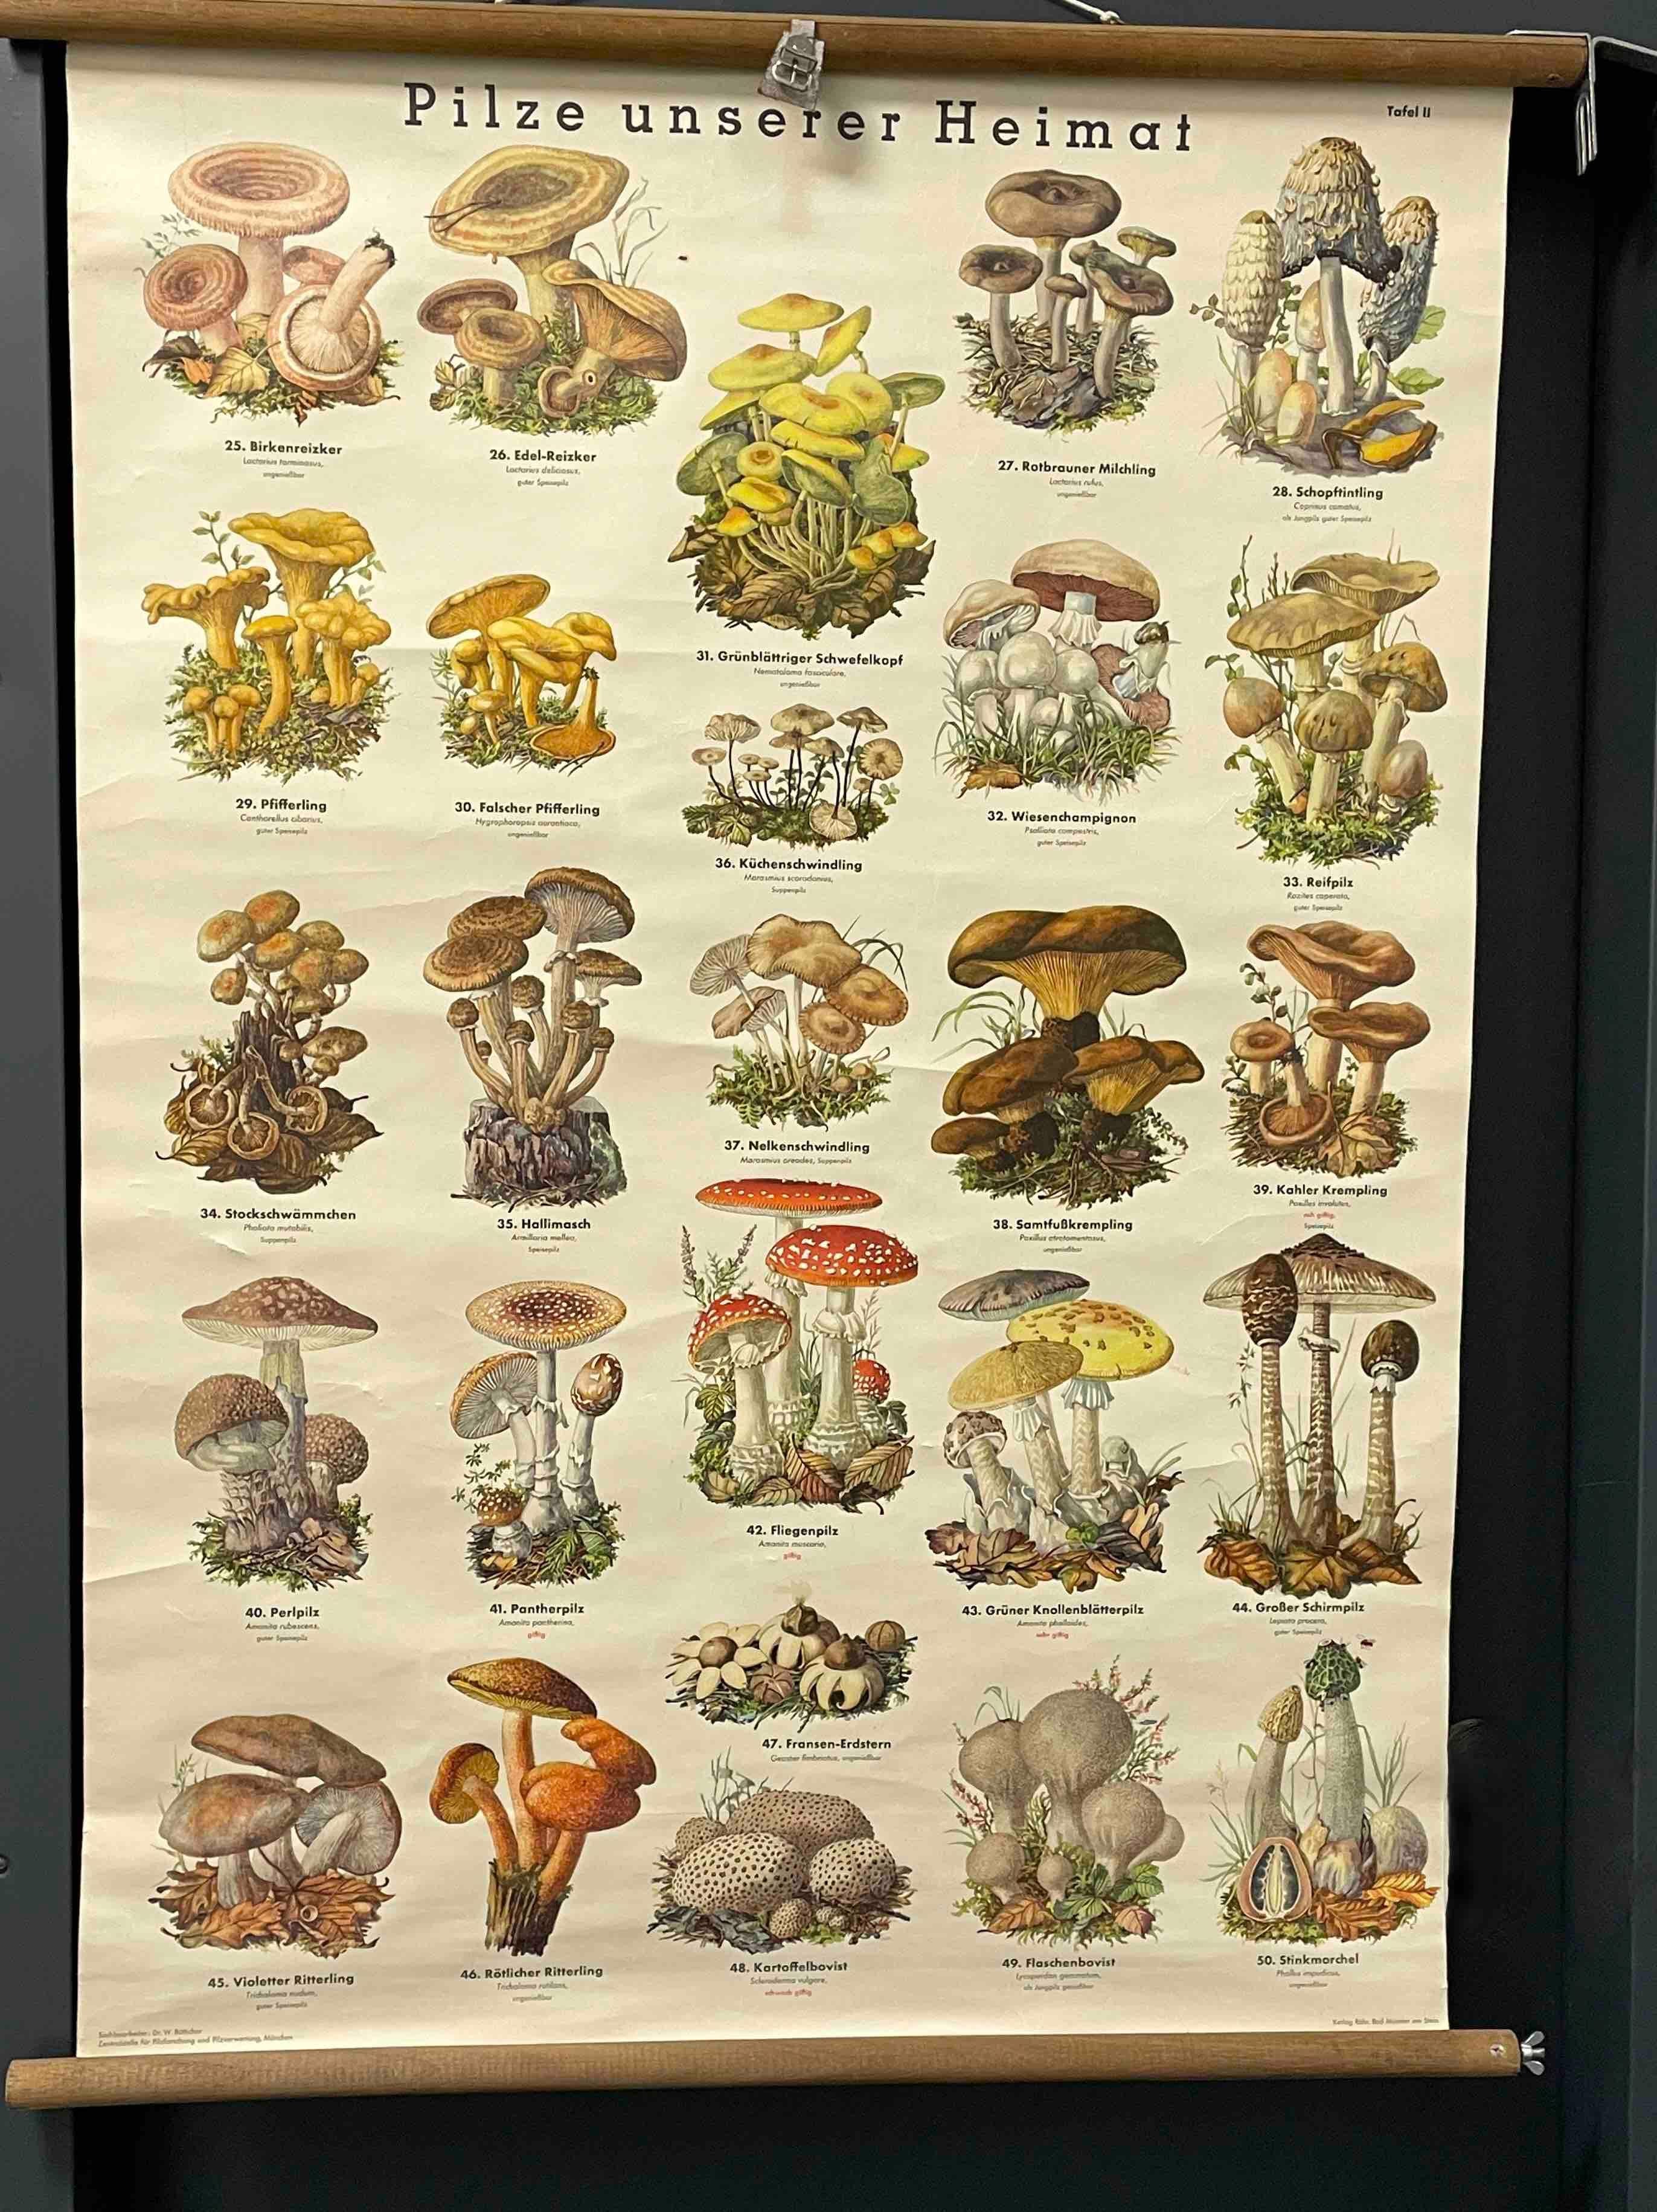 This rare vintage wall chart shows different types of mushrooms, which are native to middle europe. This kind of wall charts are used as teaching material in German schools. Colorful print on paper reinforced with canvas.